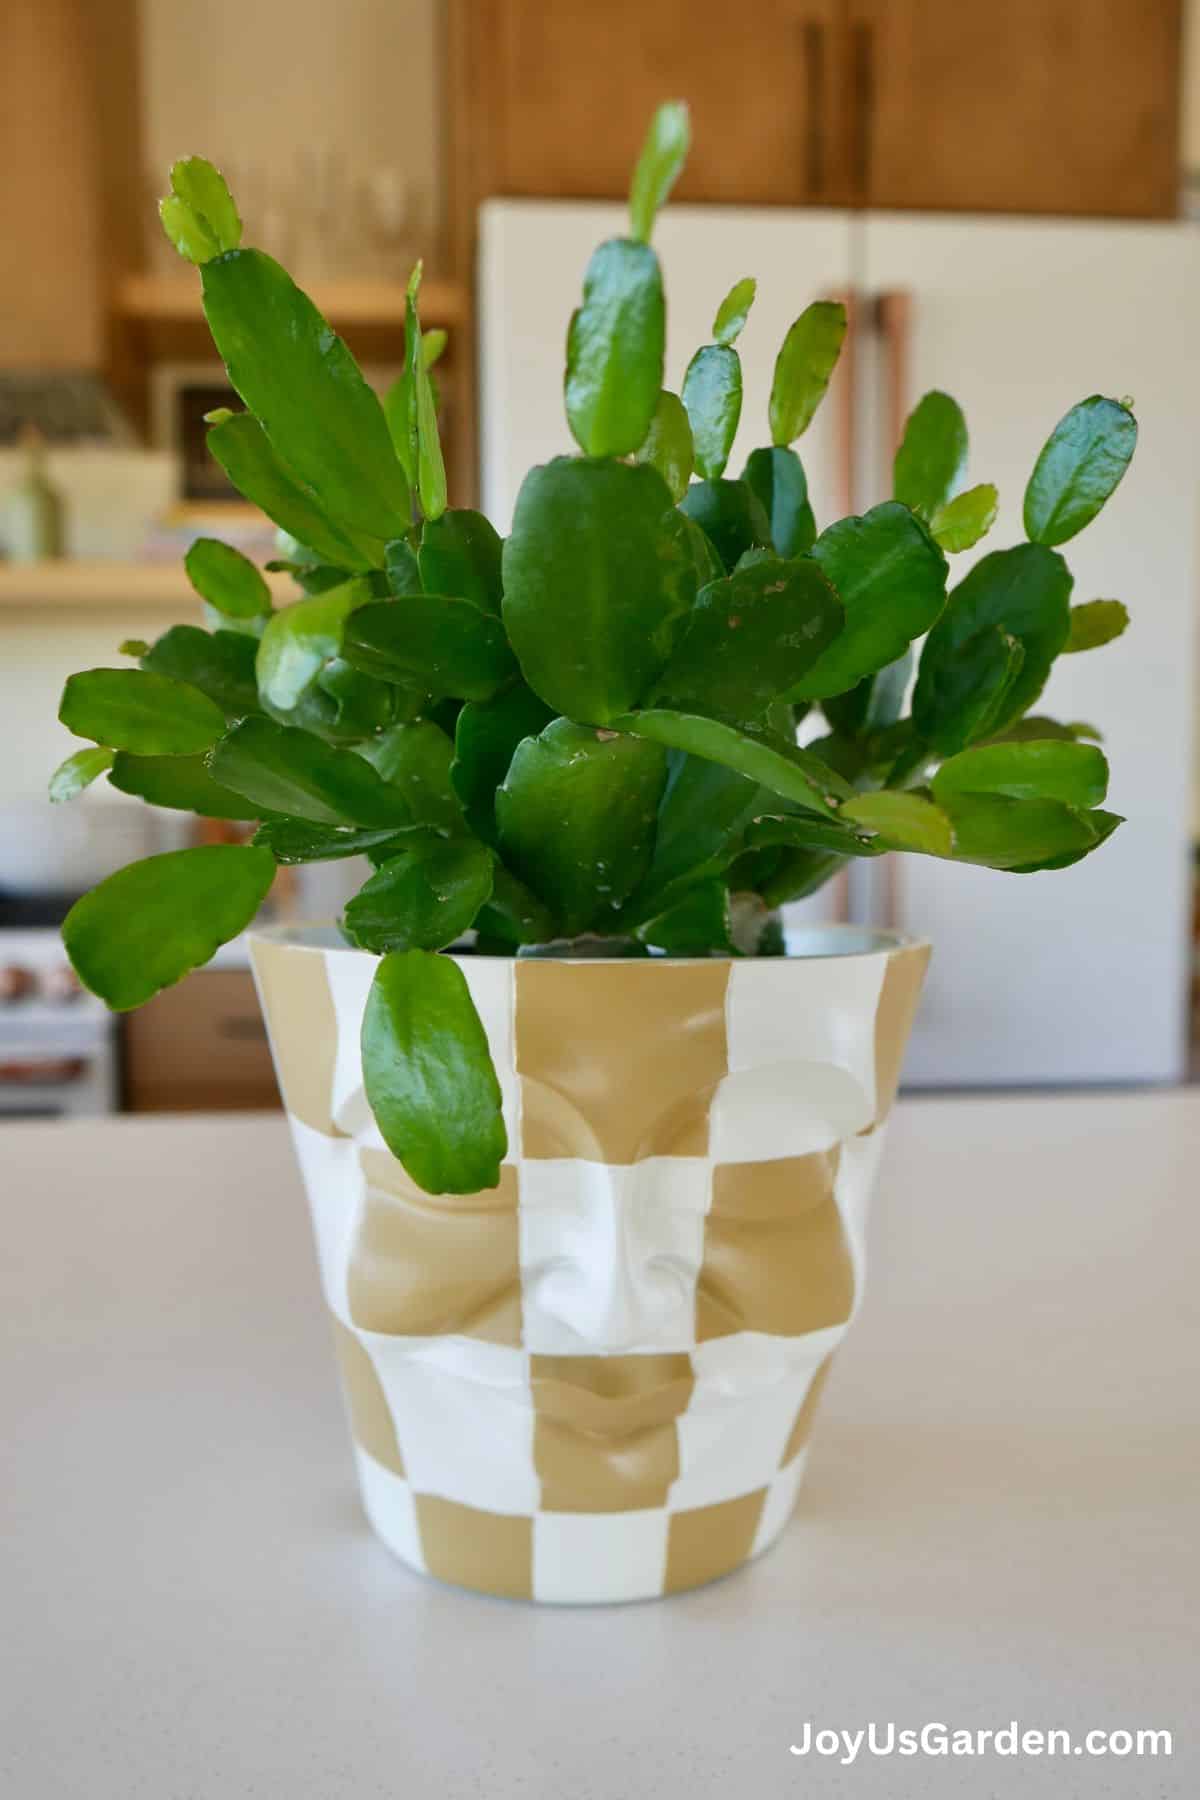 Easter cactus shown growing in a tan and white checkered faced pot in a bright room.